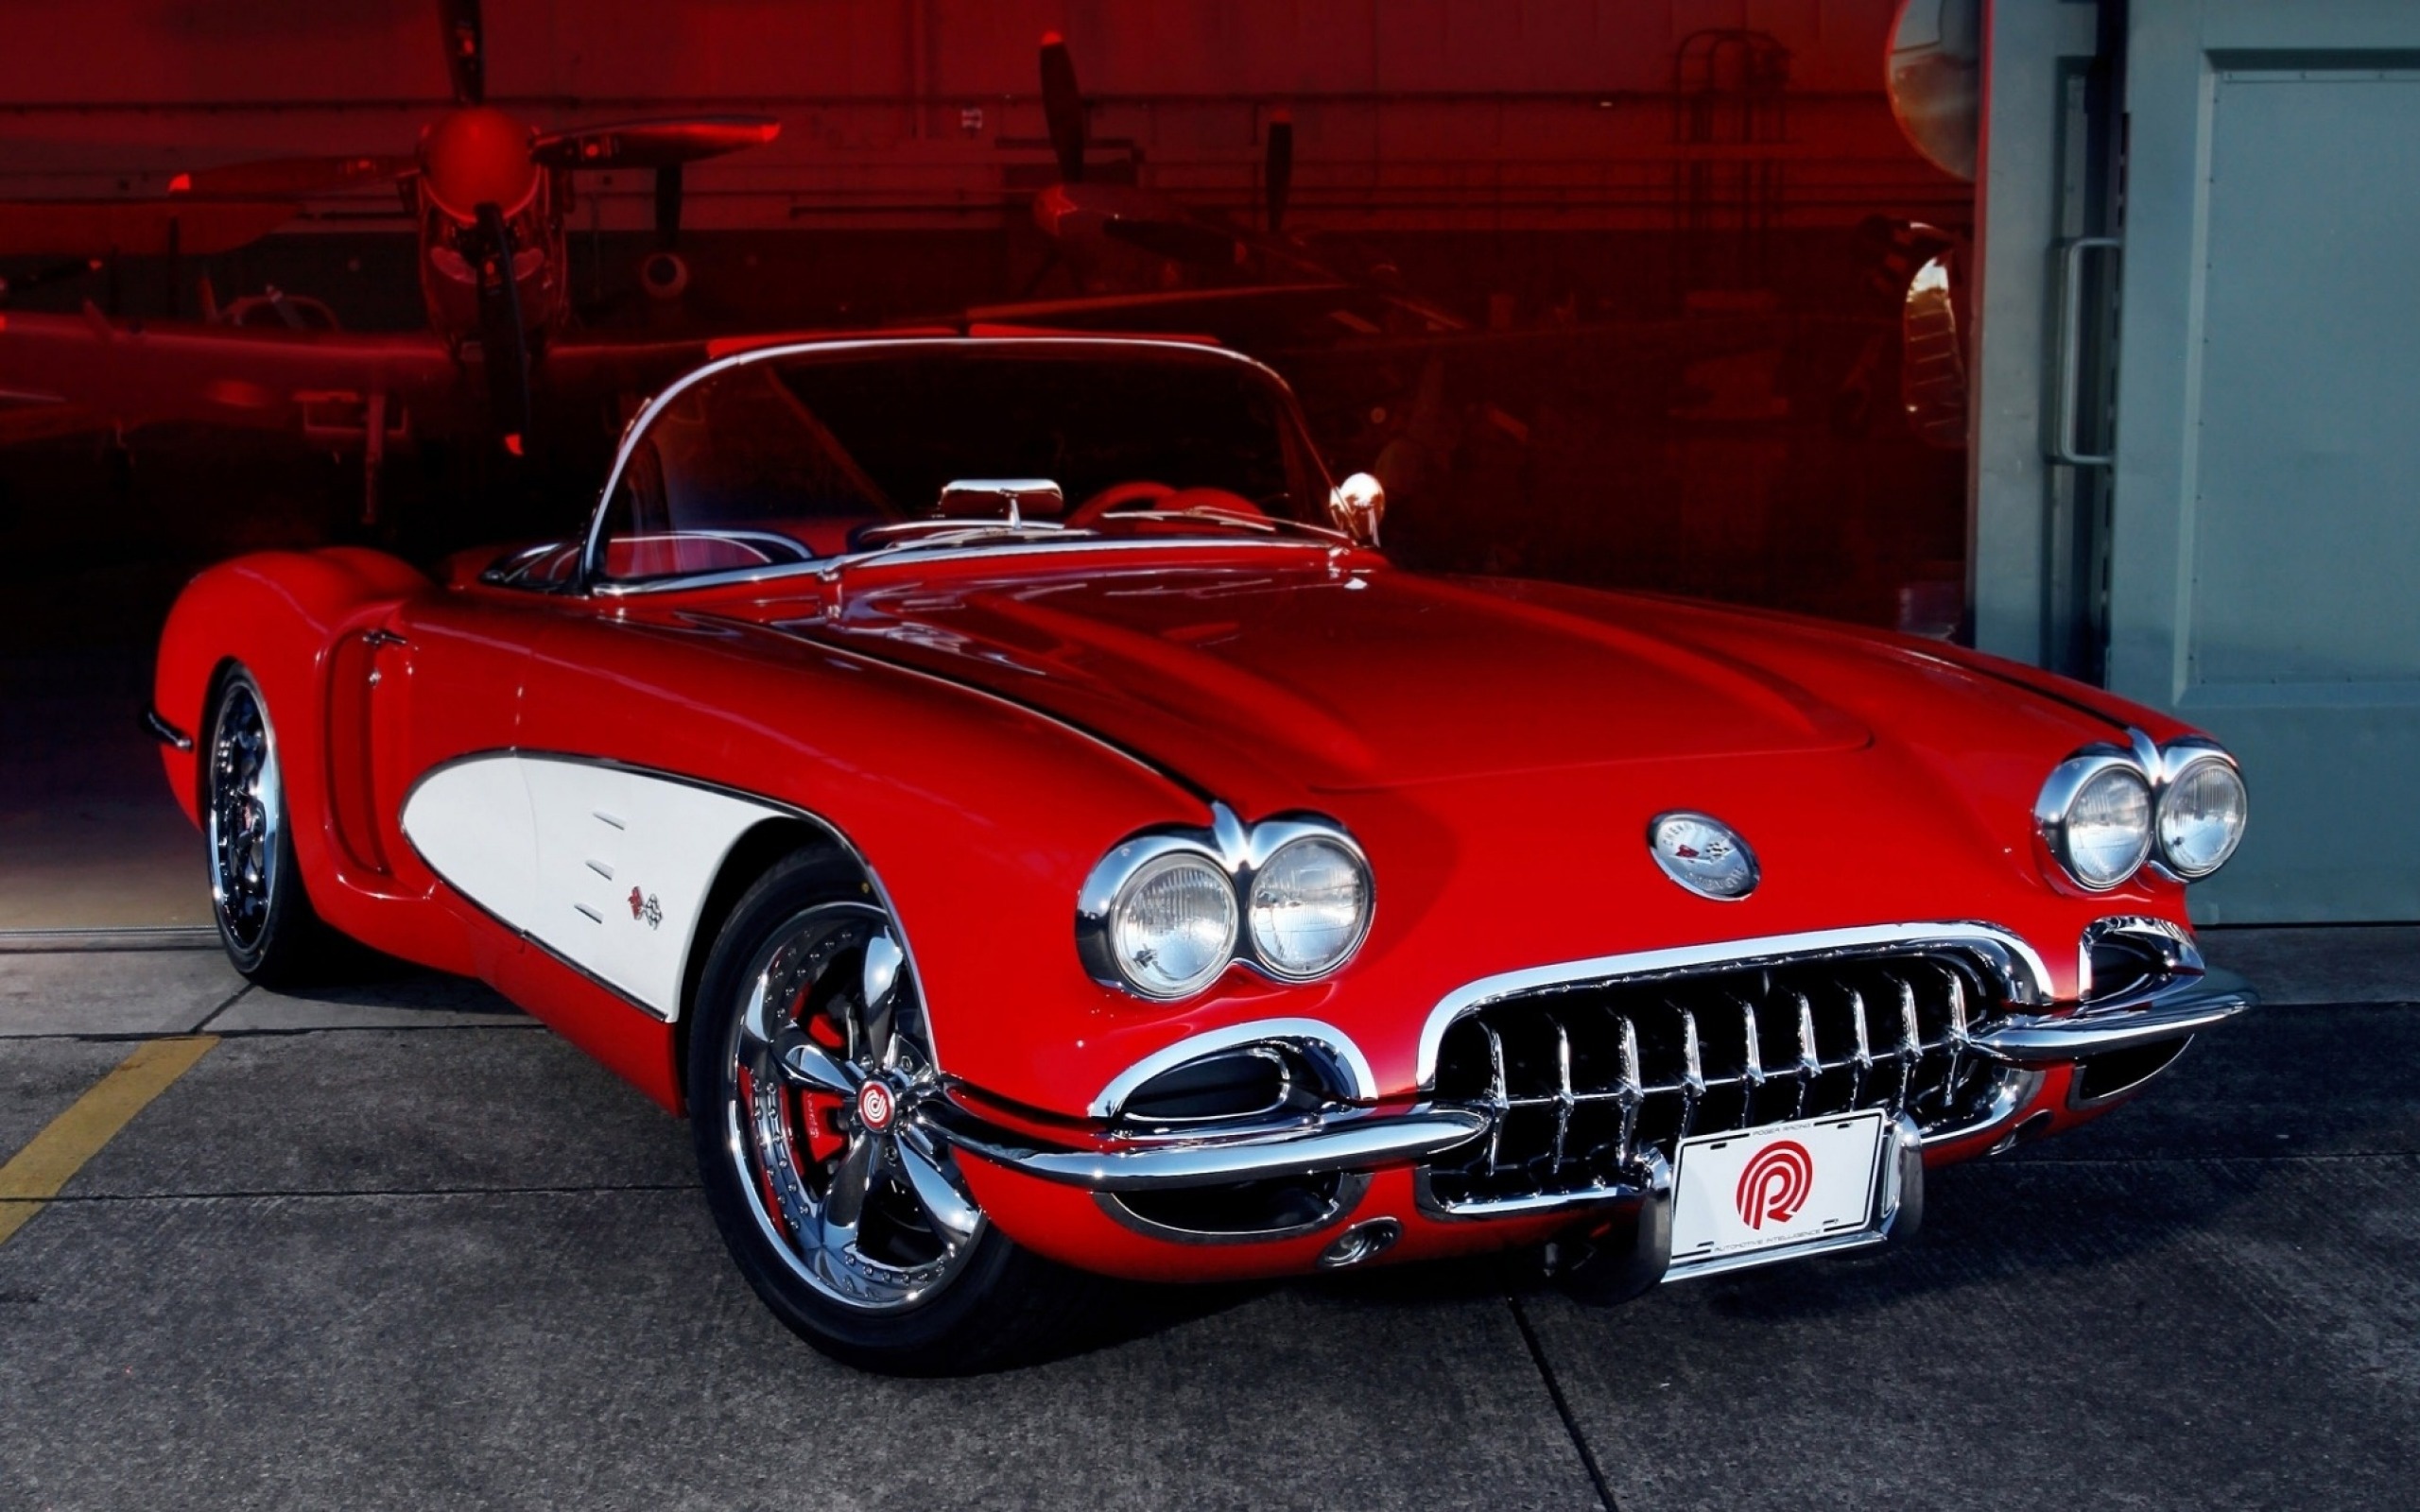 Corvette: 1954 Chevrolet C1, The first American production sports car, Retro exotic vehicle. 2560x1600 HD Wallpaper.